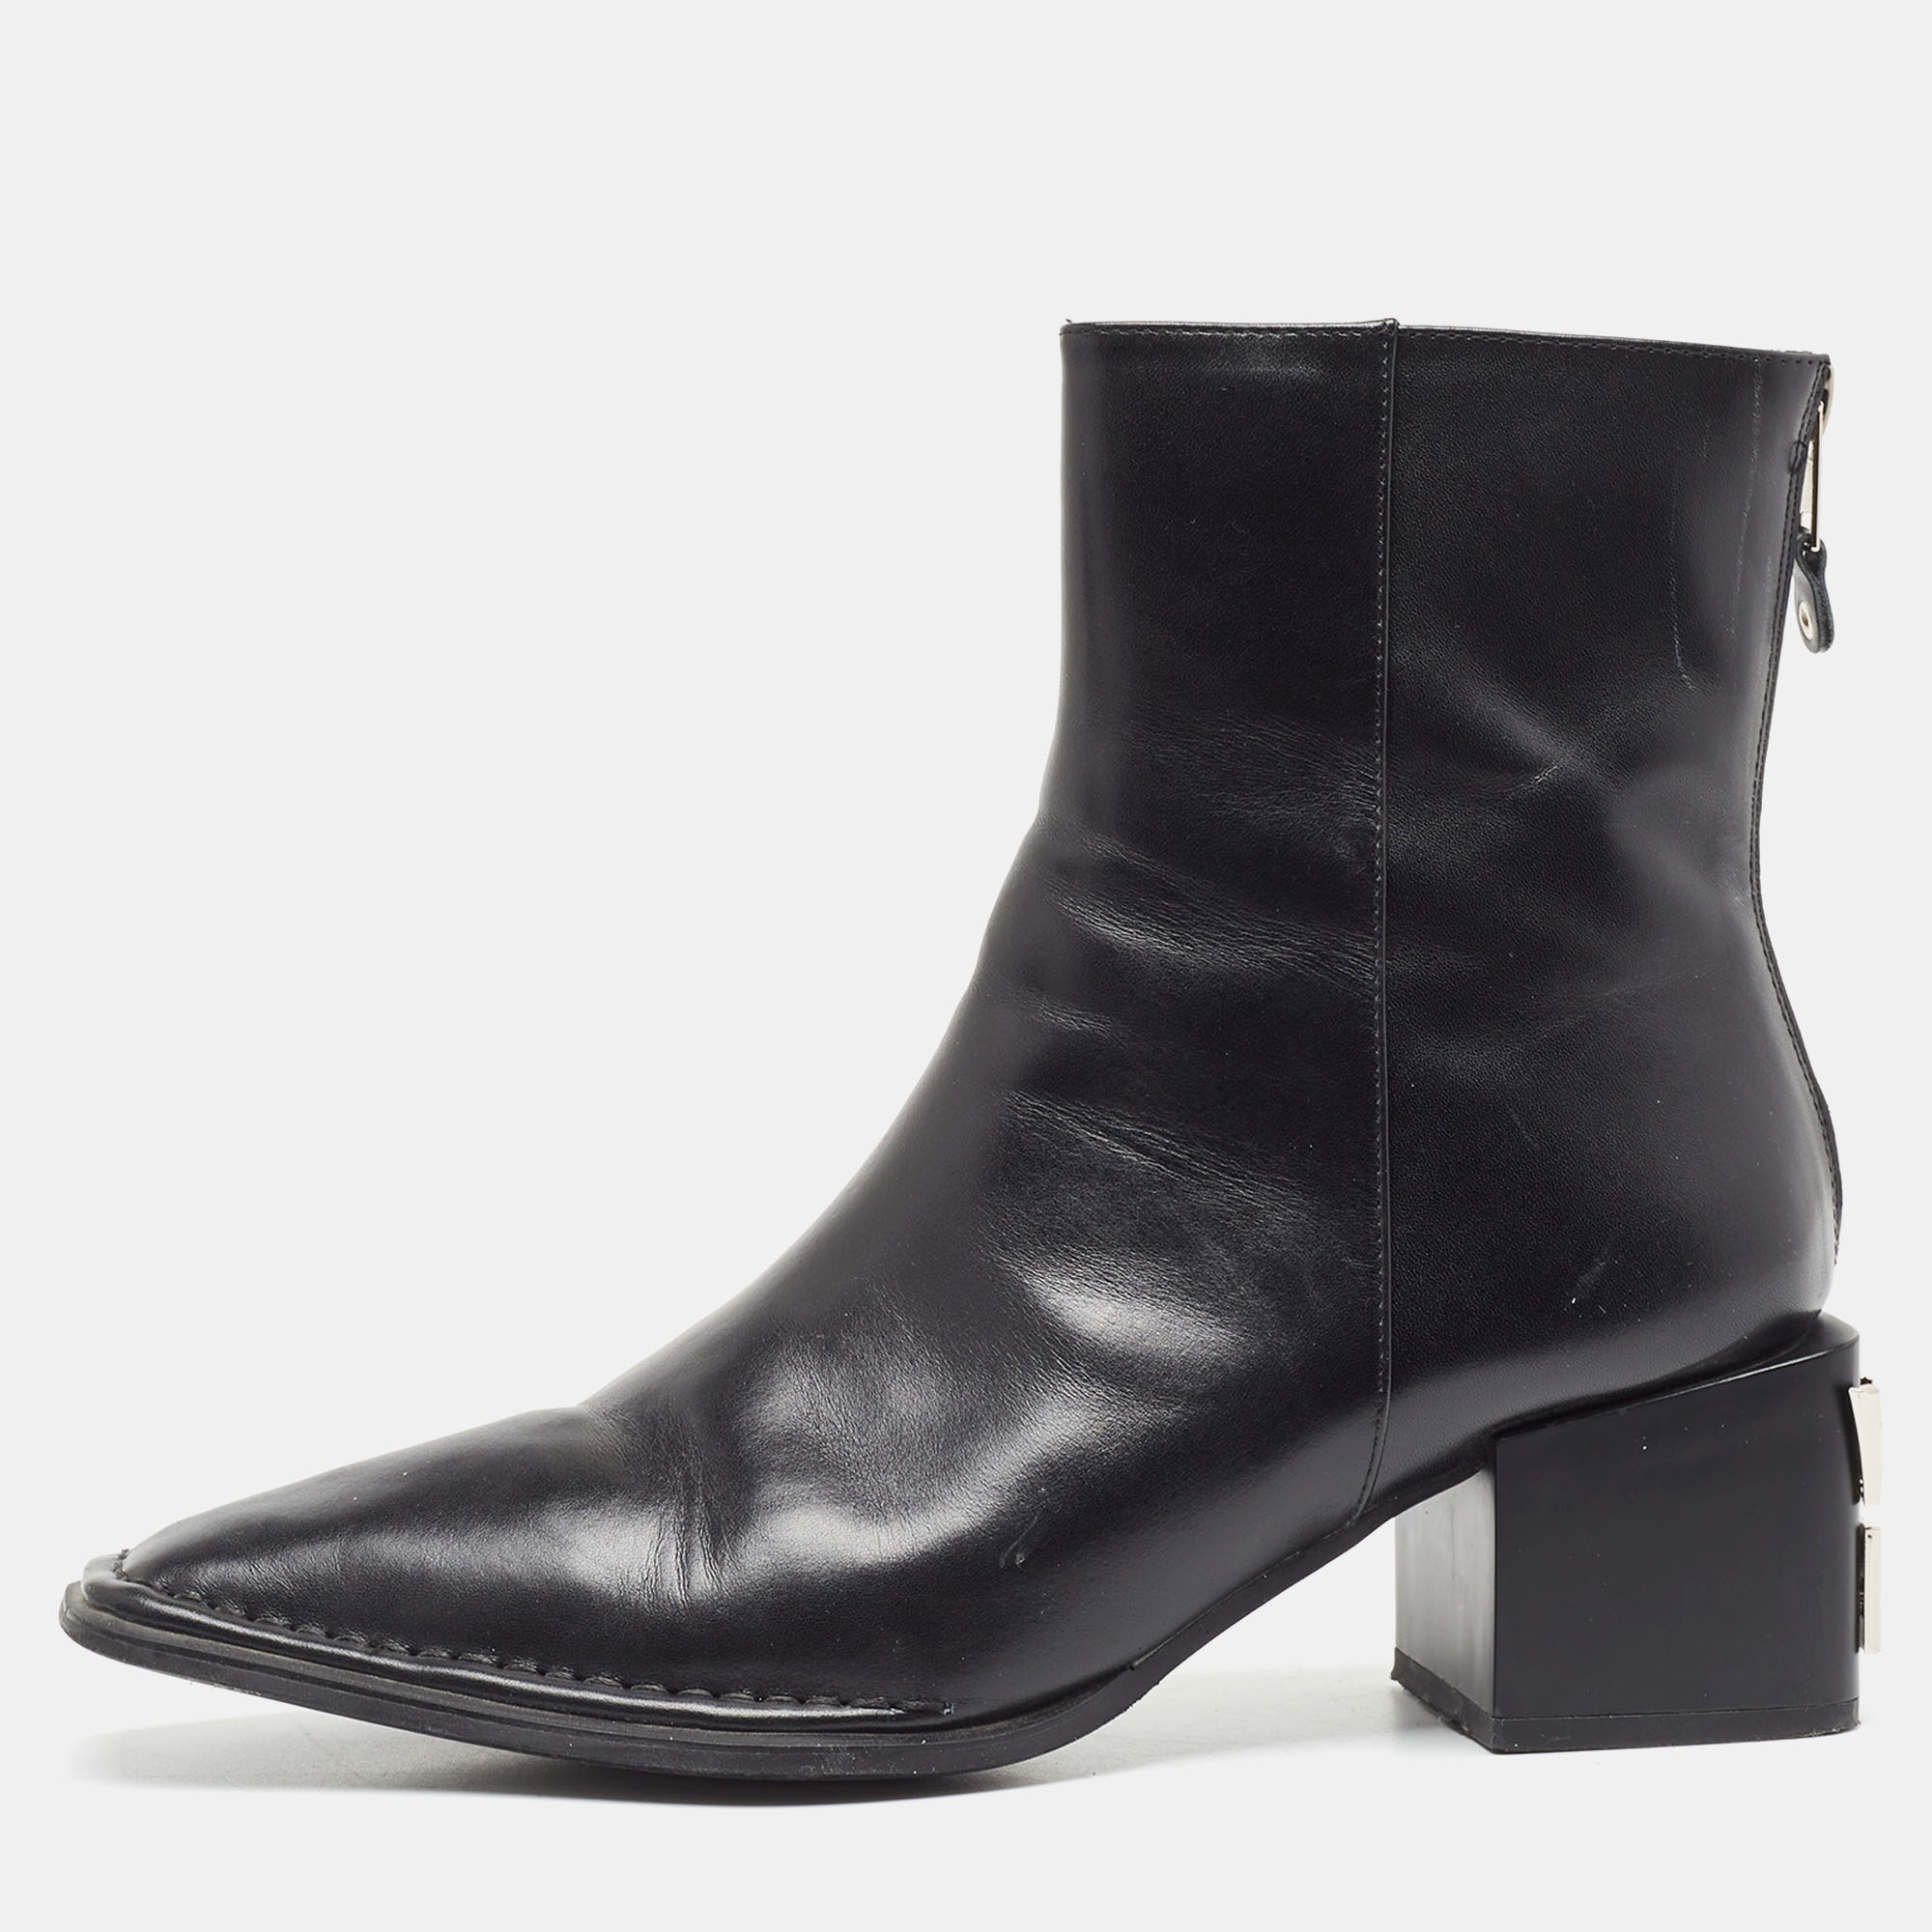 Alexander wang black leather ankle boots size 41